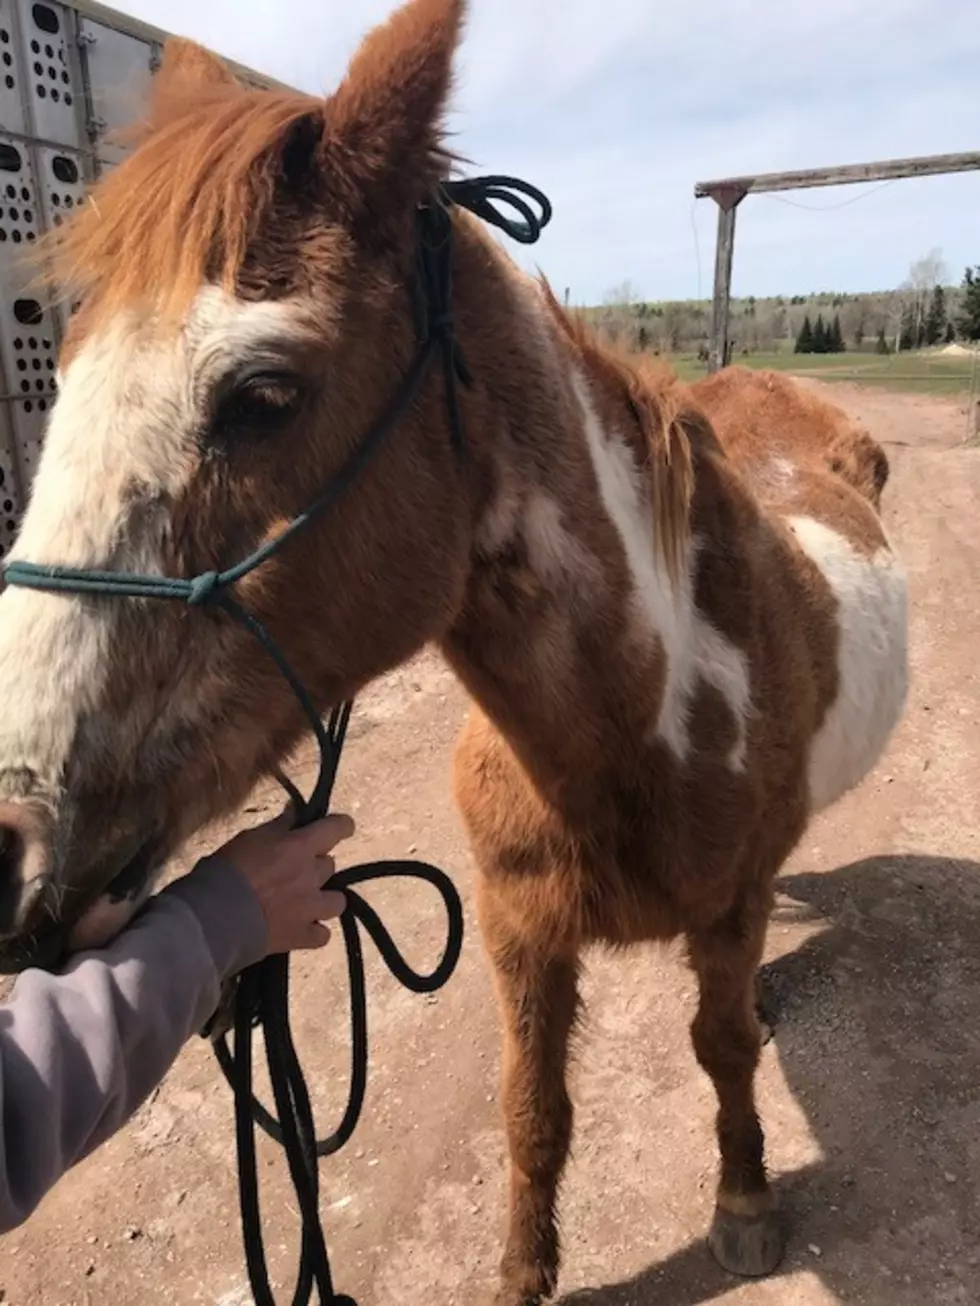 This Emaciated Horse Needs Your Help